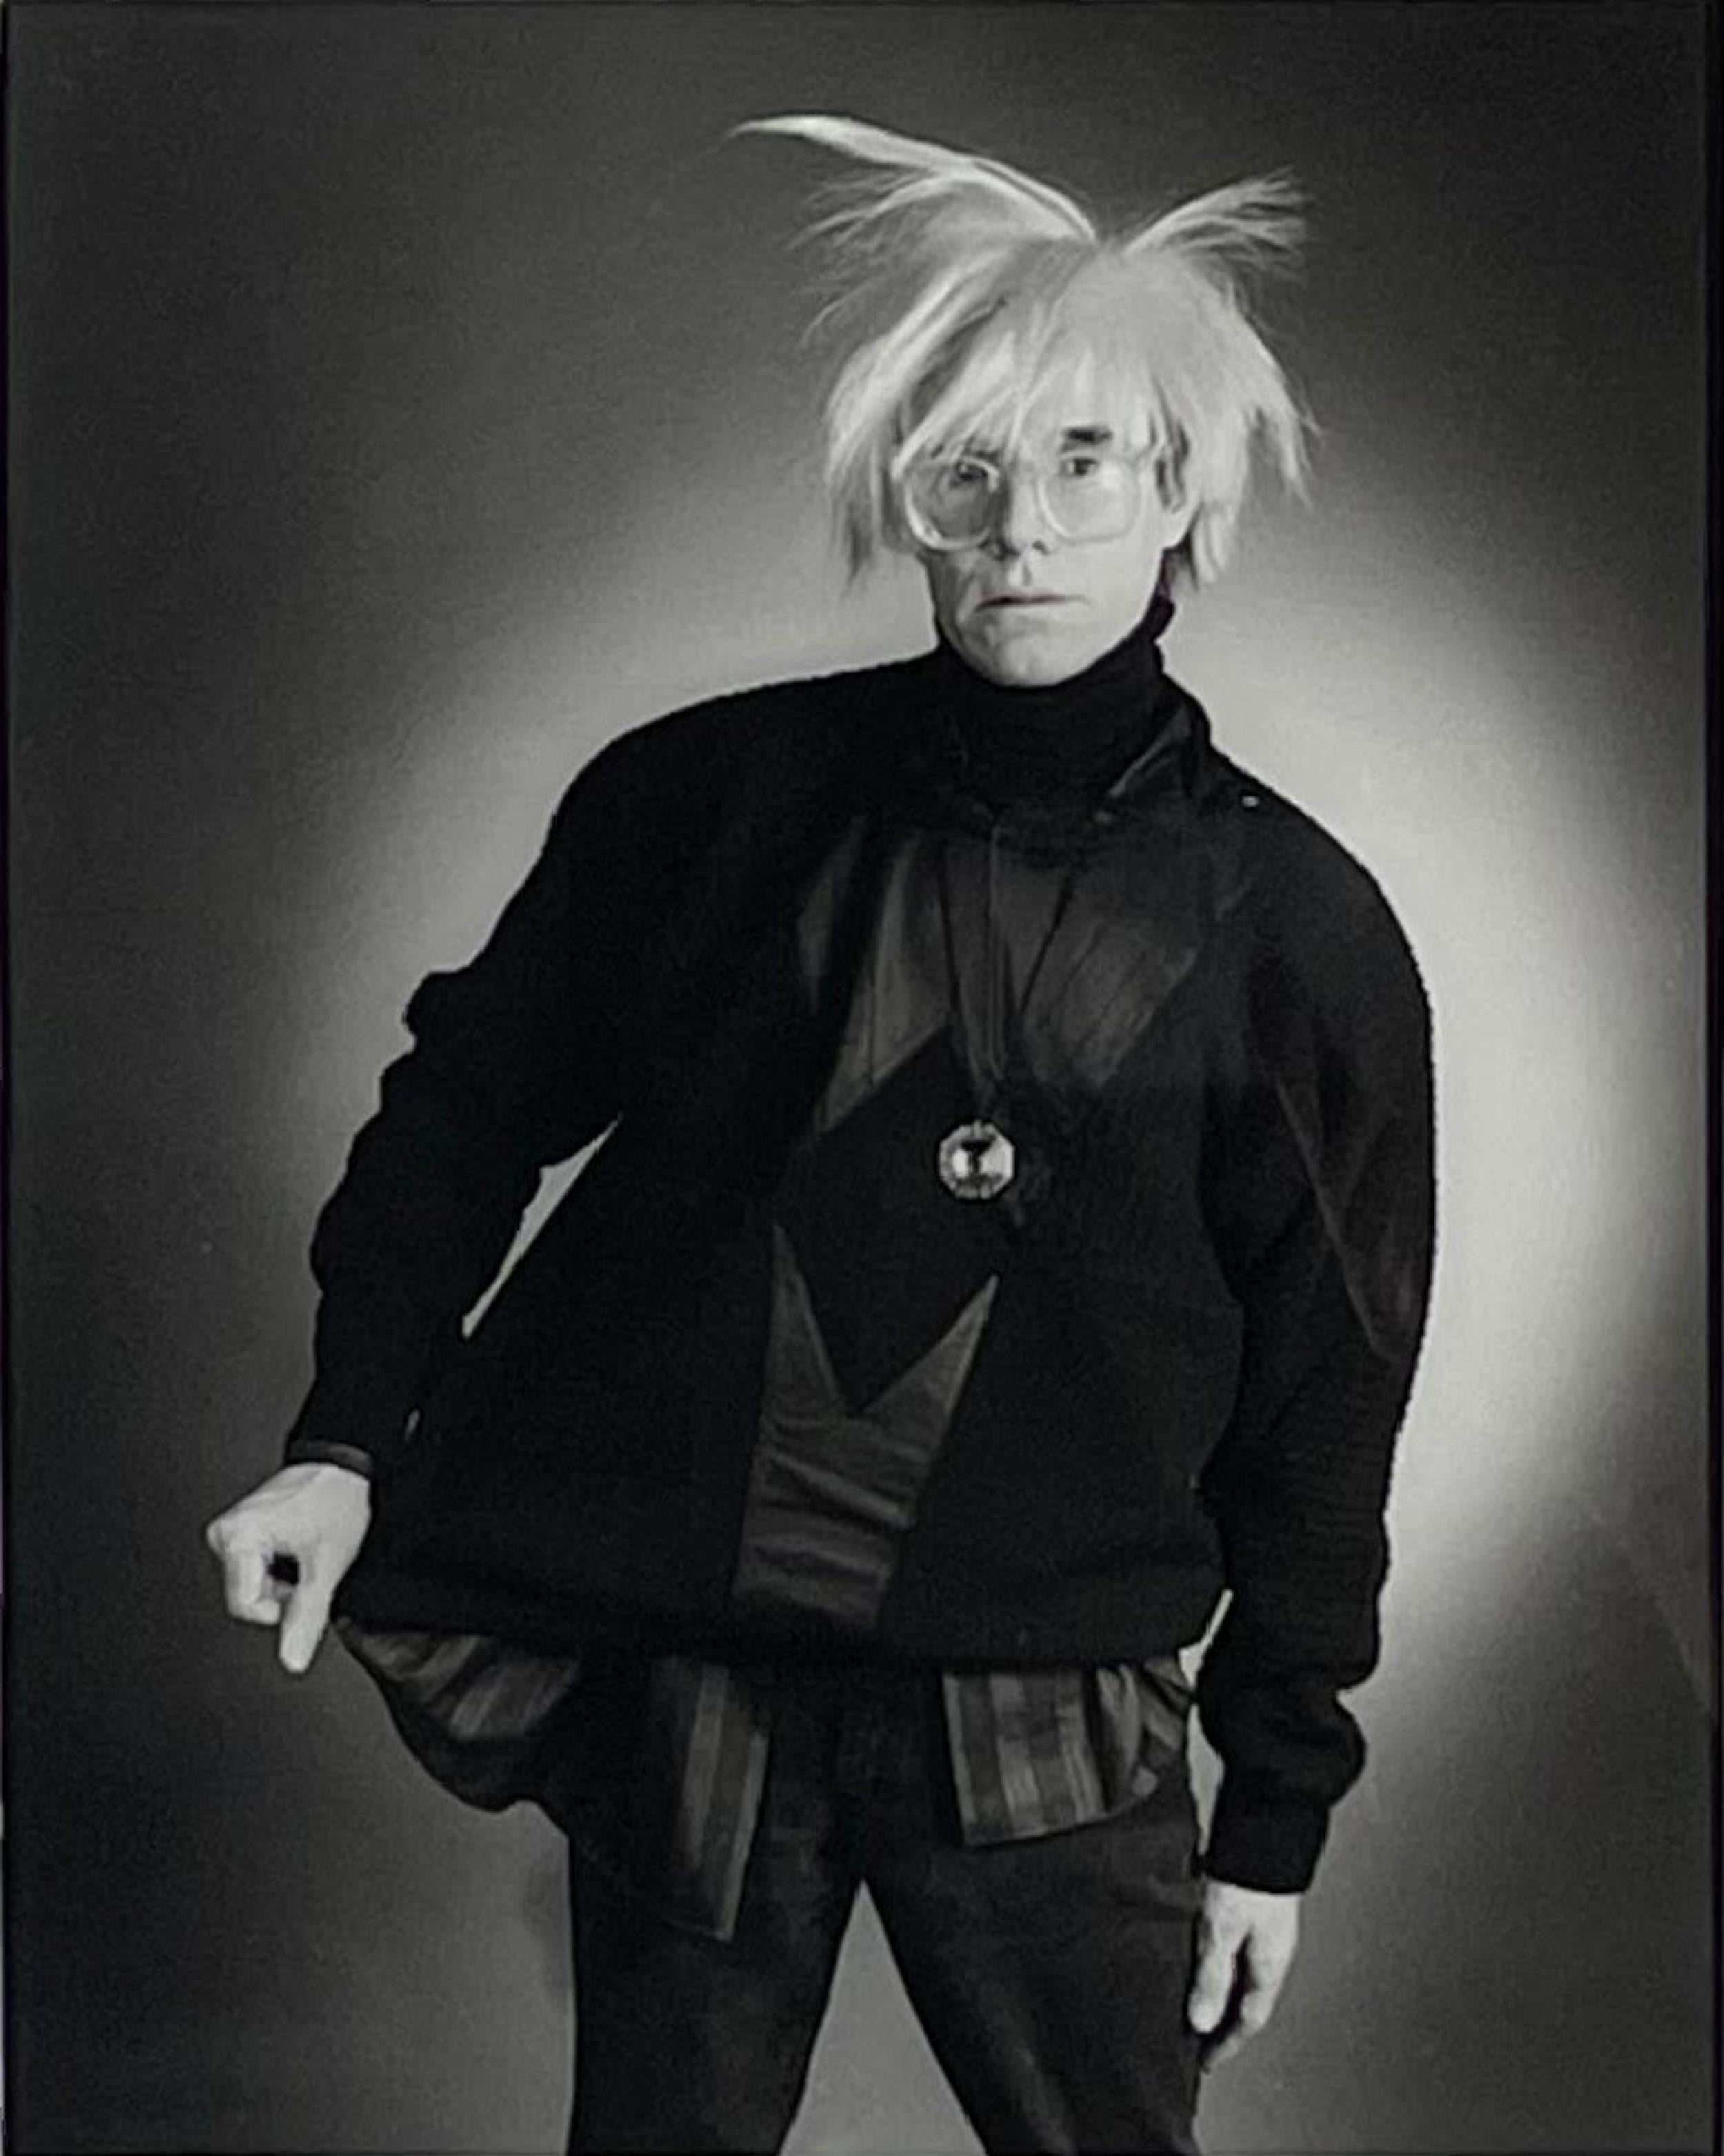 Christopher Makos and Andy Warhol Black and White Photograph – Porträt von Andy Warhol, handsigniert von BOTH Andy Warhol und Christopher Makos